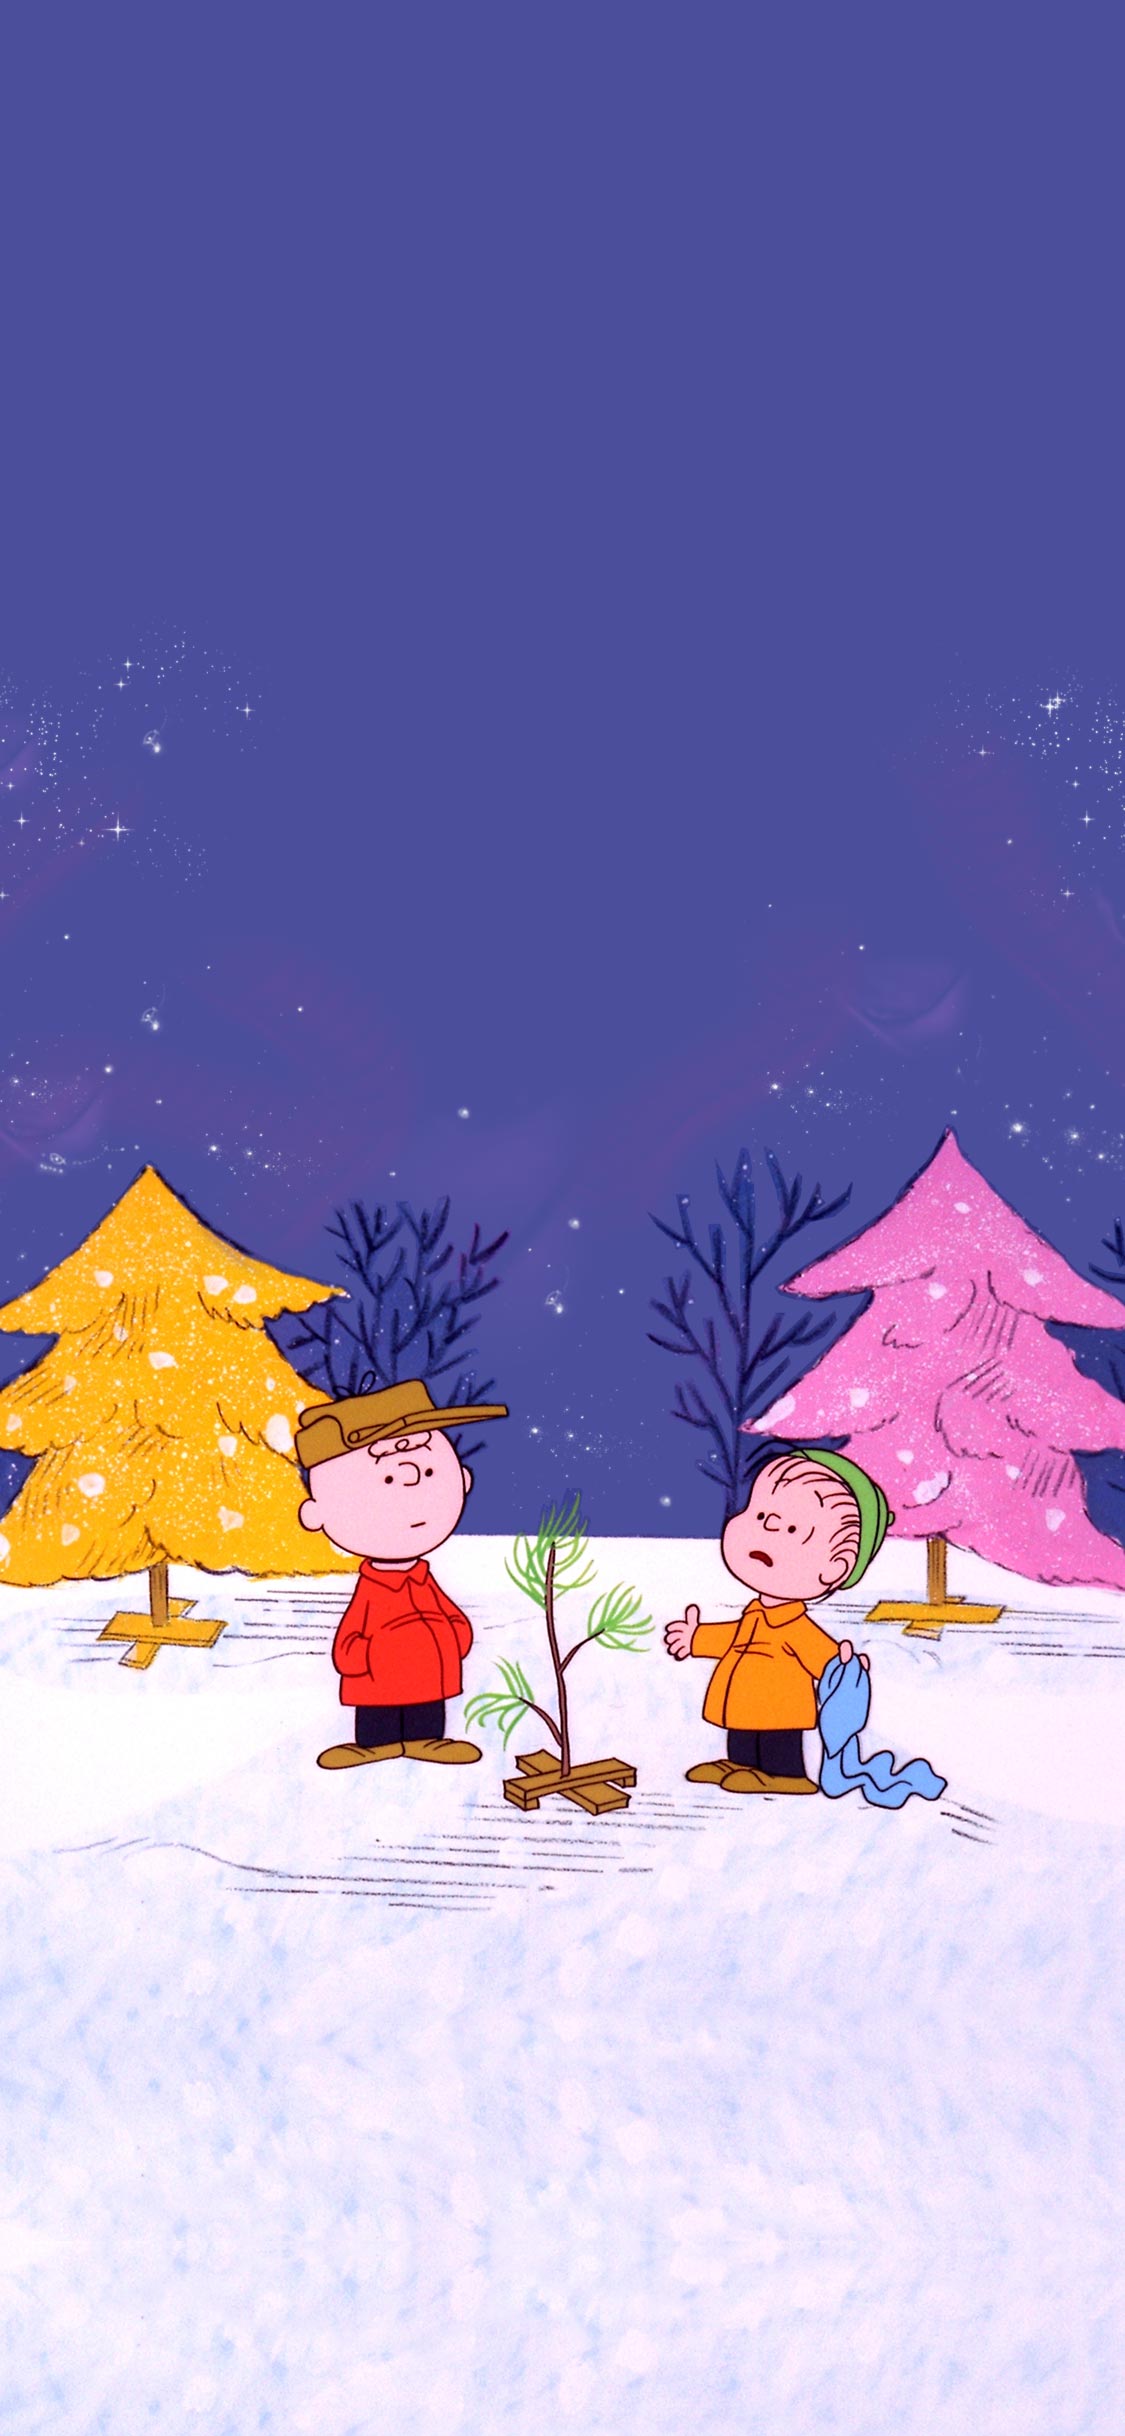 Download Snoopy Christmas Iphone Wallpaper Nomer 41